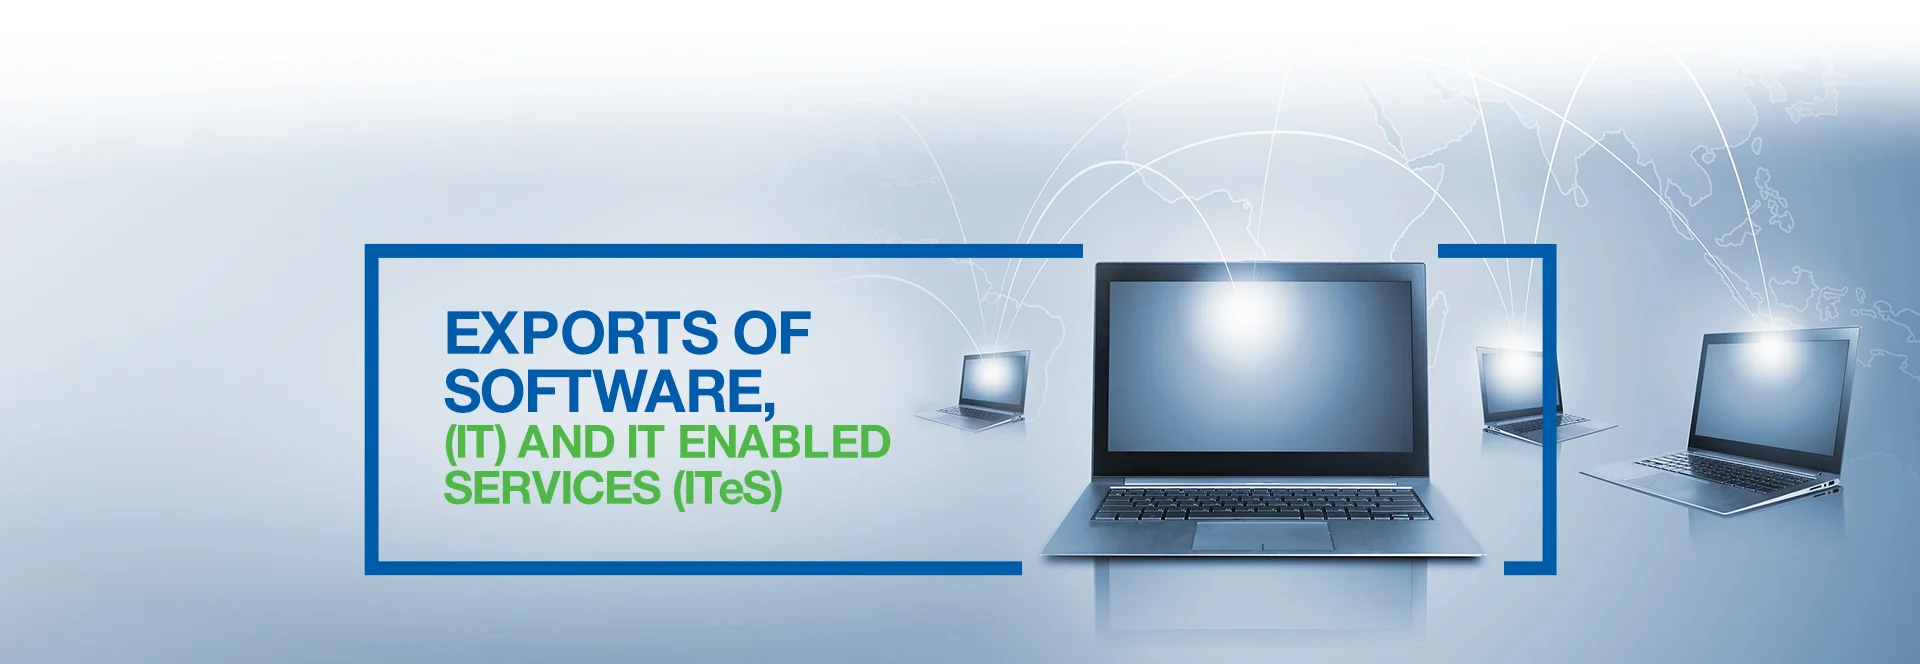 Exports of Software, (IT) and IT Enabled Services (ITeS)